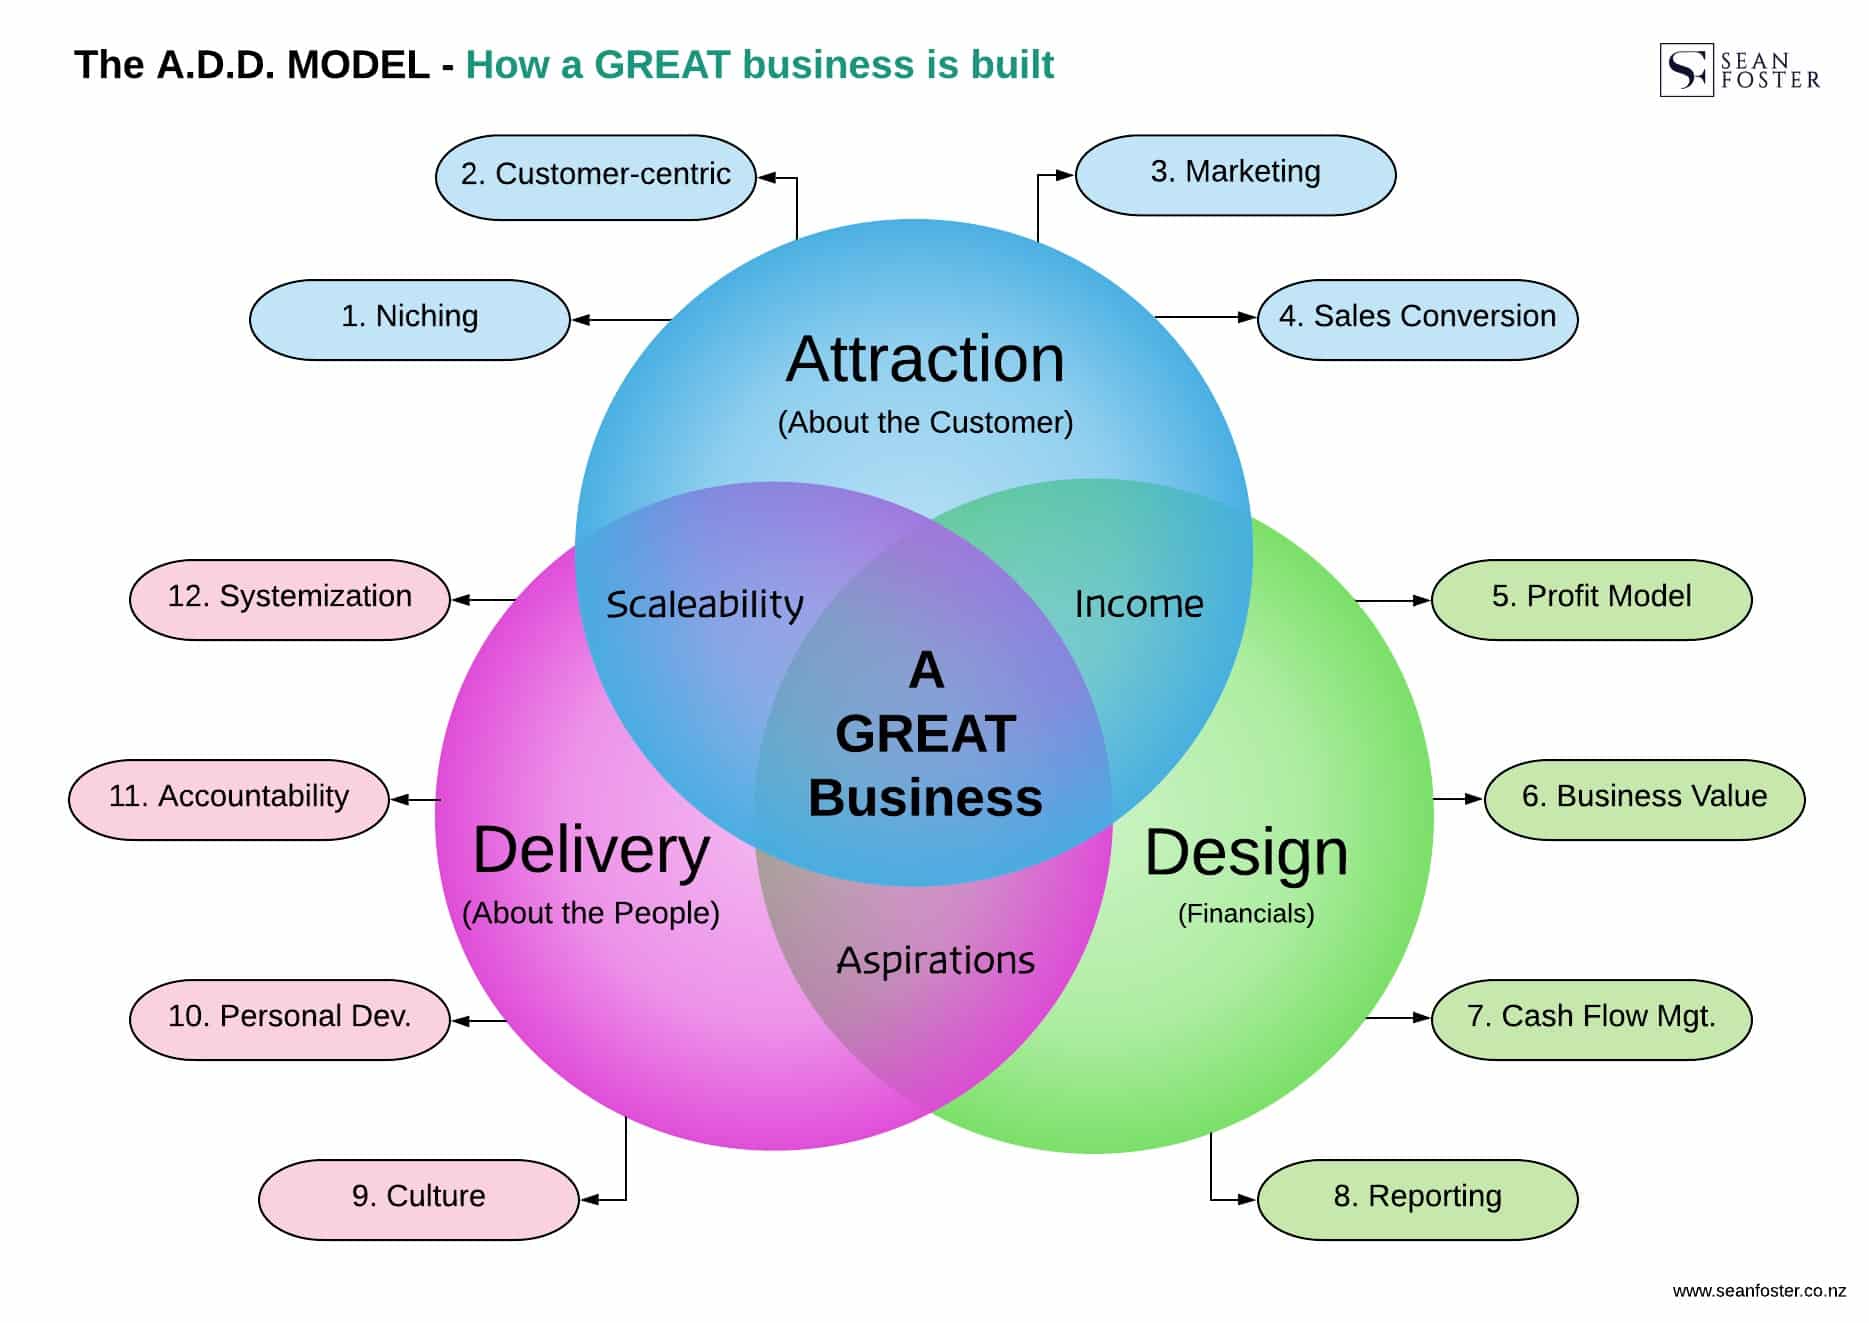 ADD model of a Great Business